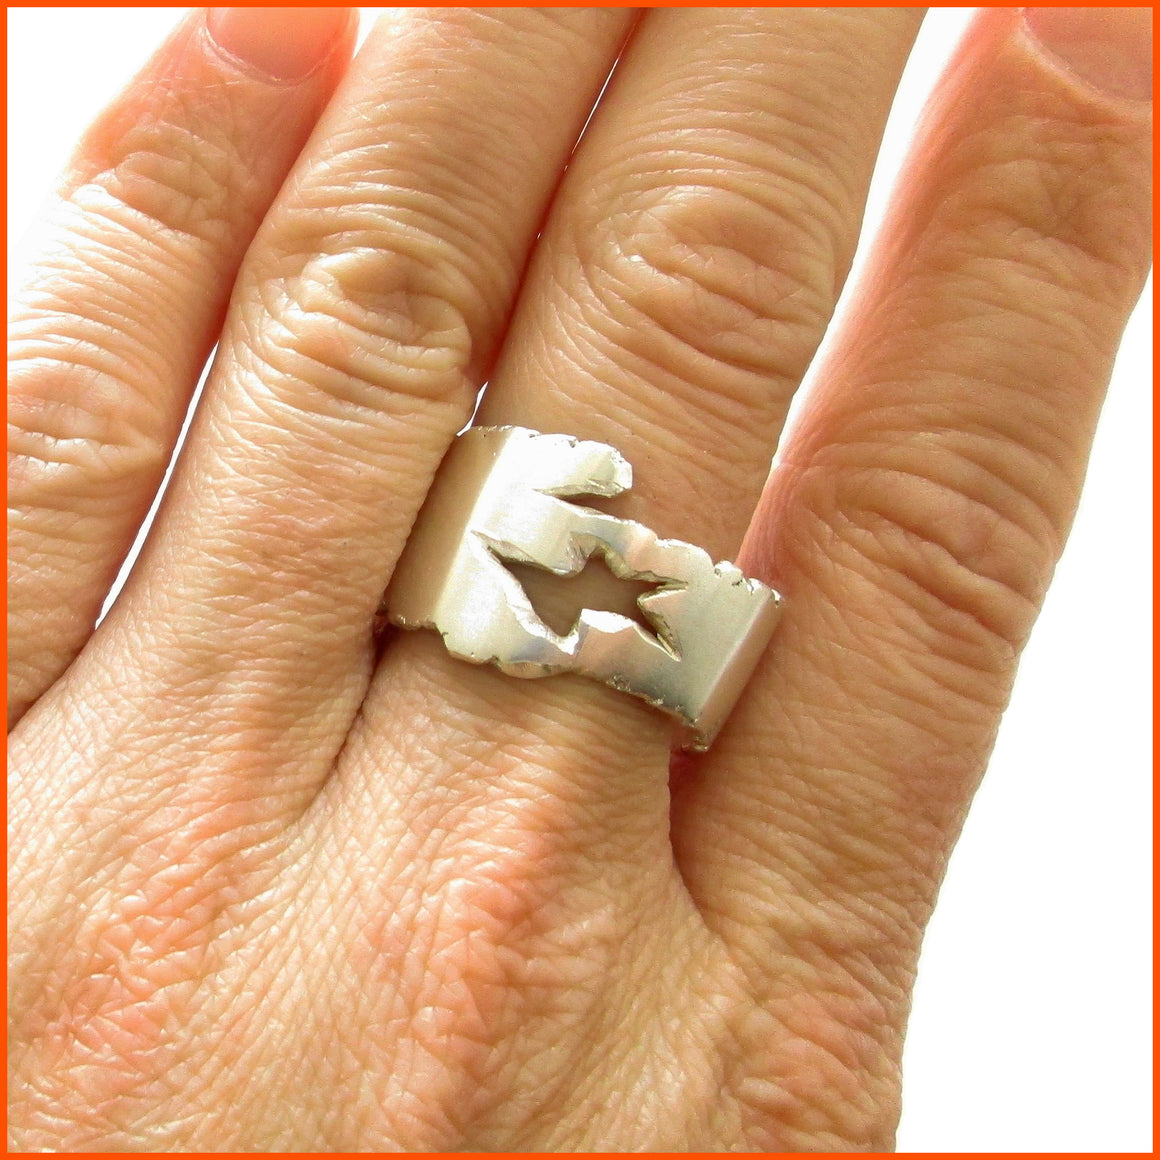 sterling silver matte surface hand-made, one-of-a-kind approx. size 13 great alone, stacked, or worn as a mid-finger ring